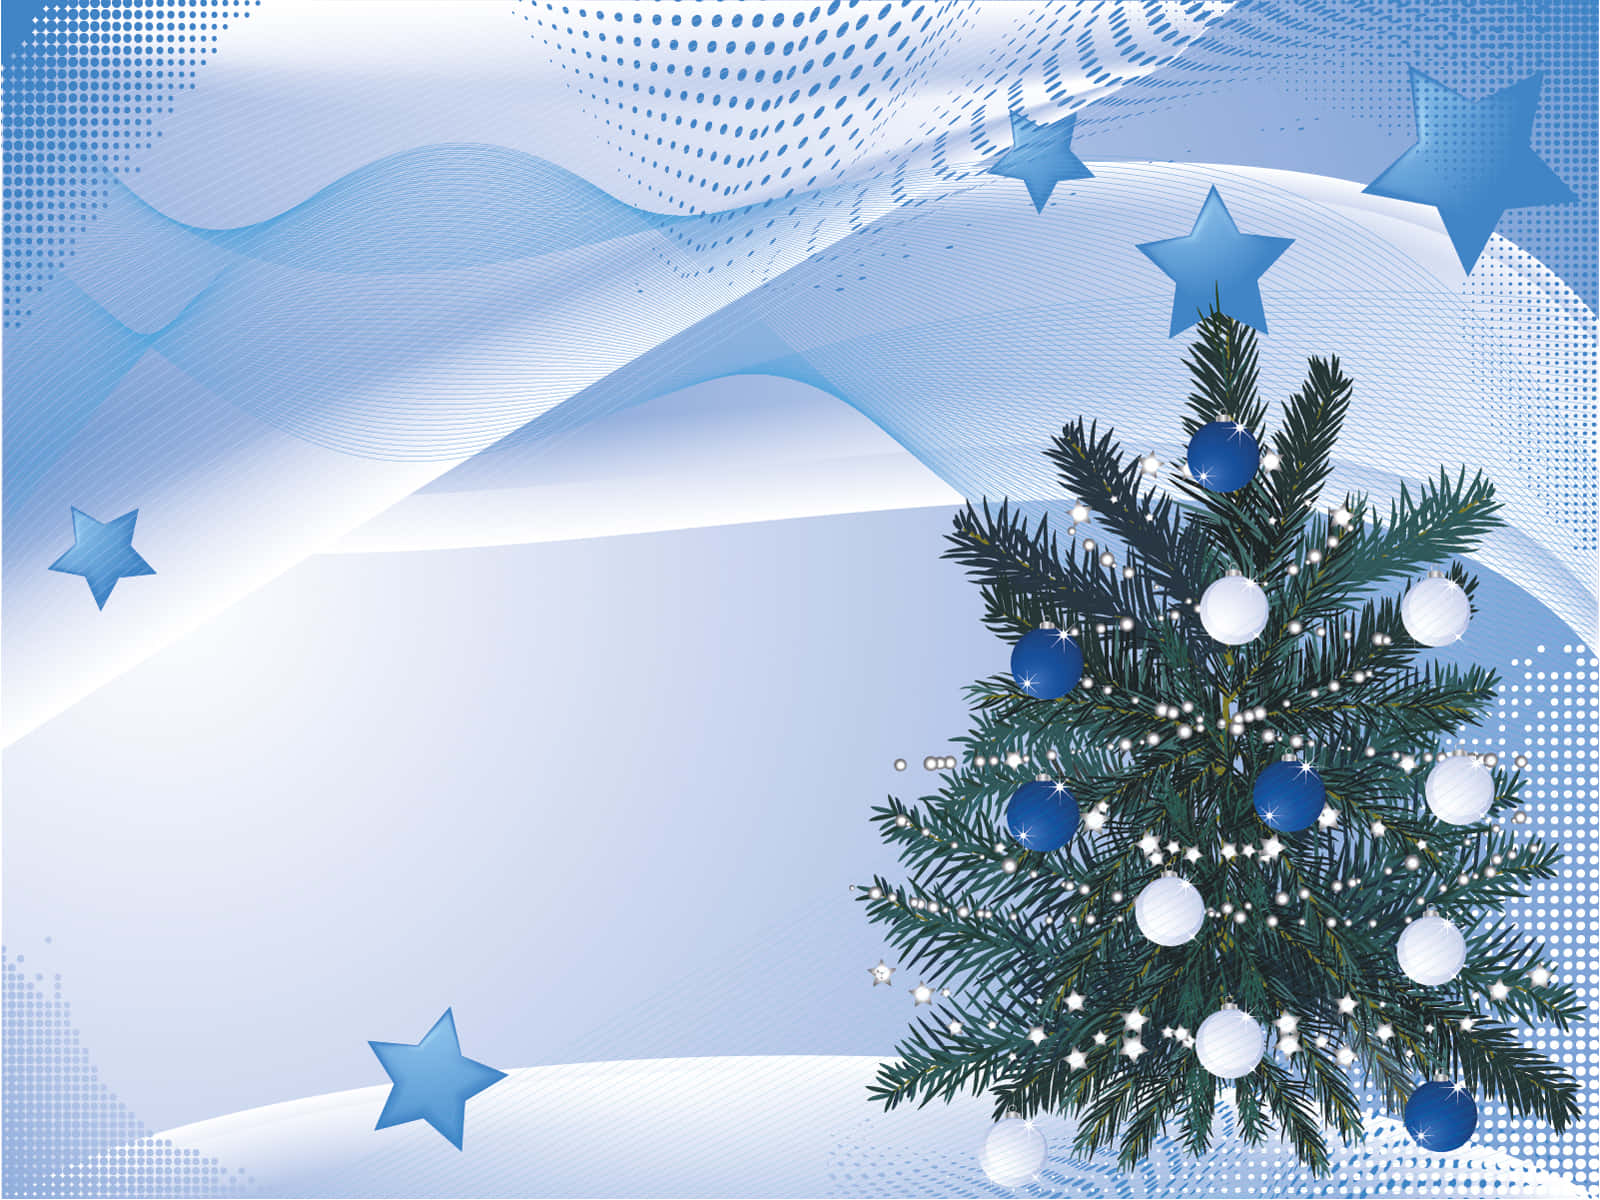 A calming blue background for the season of Christmas